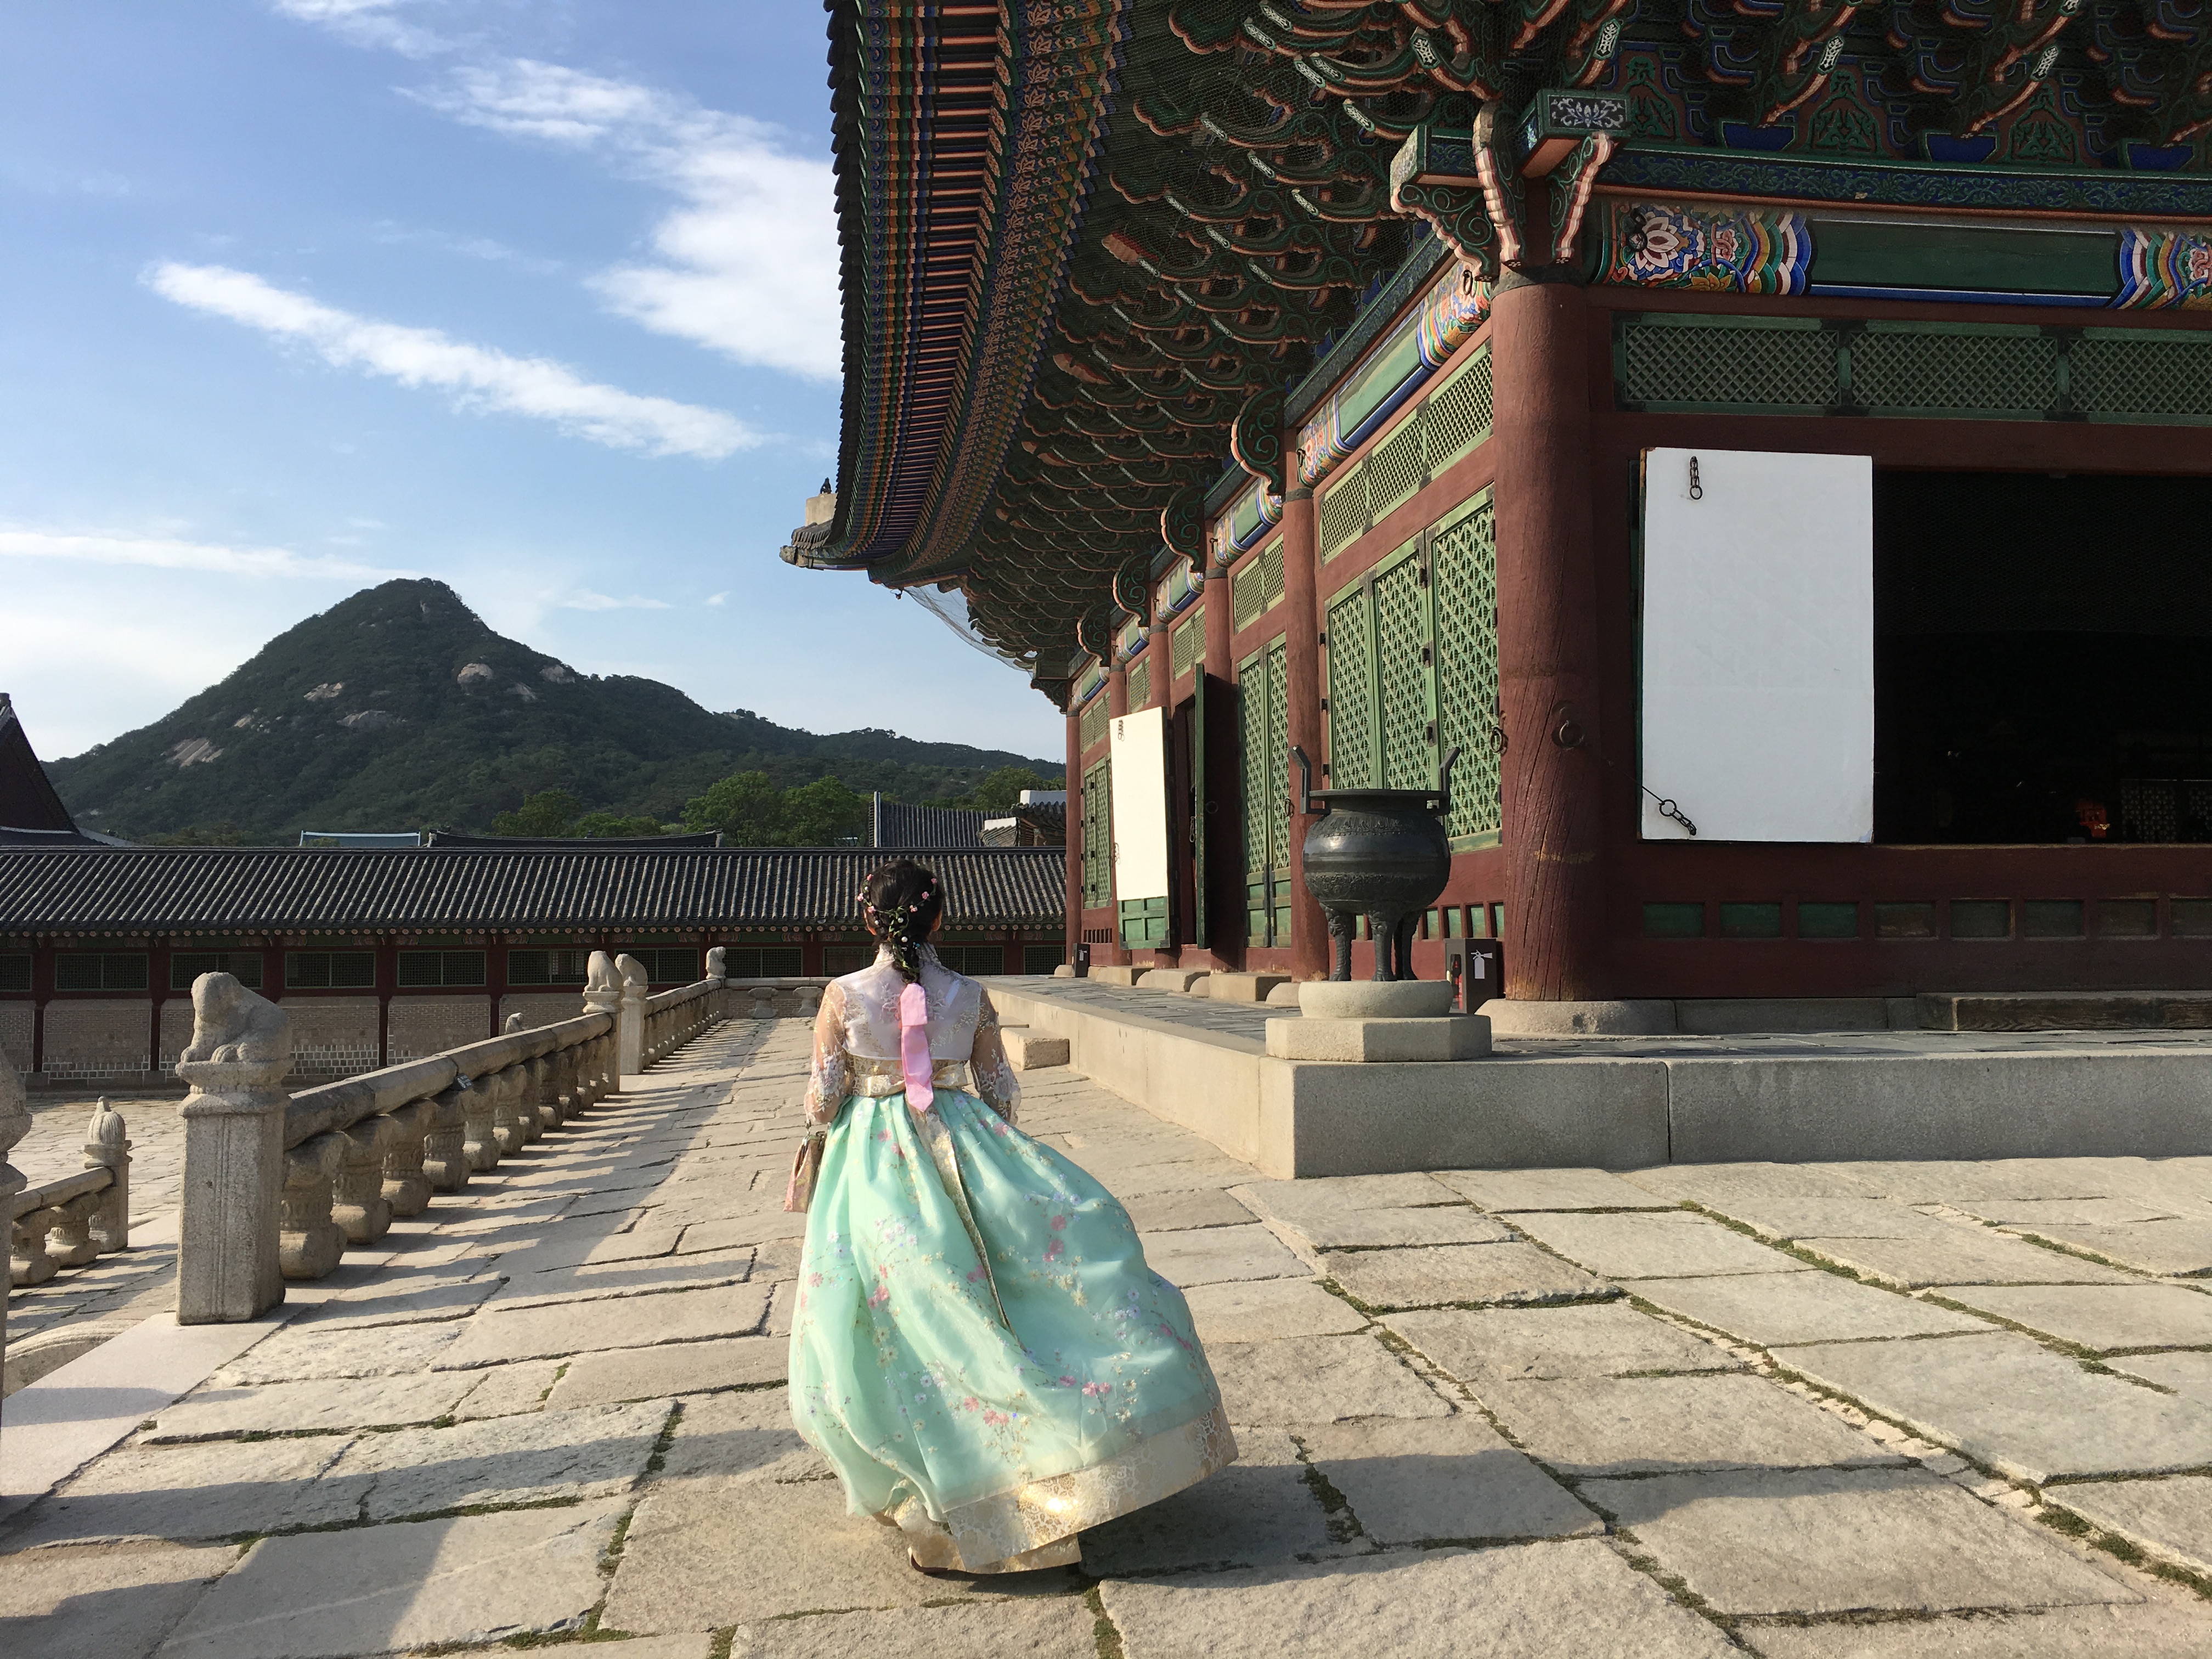 Study Abroad Photo Contest Photo, Student in Korean dress taking a stroll around Gyeongbokgung Palace